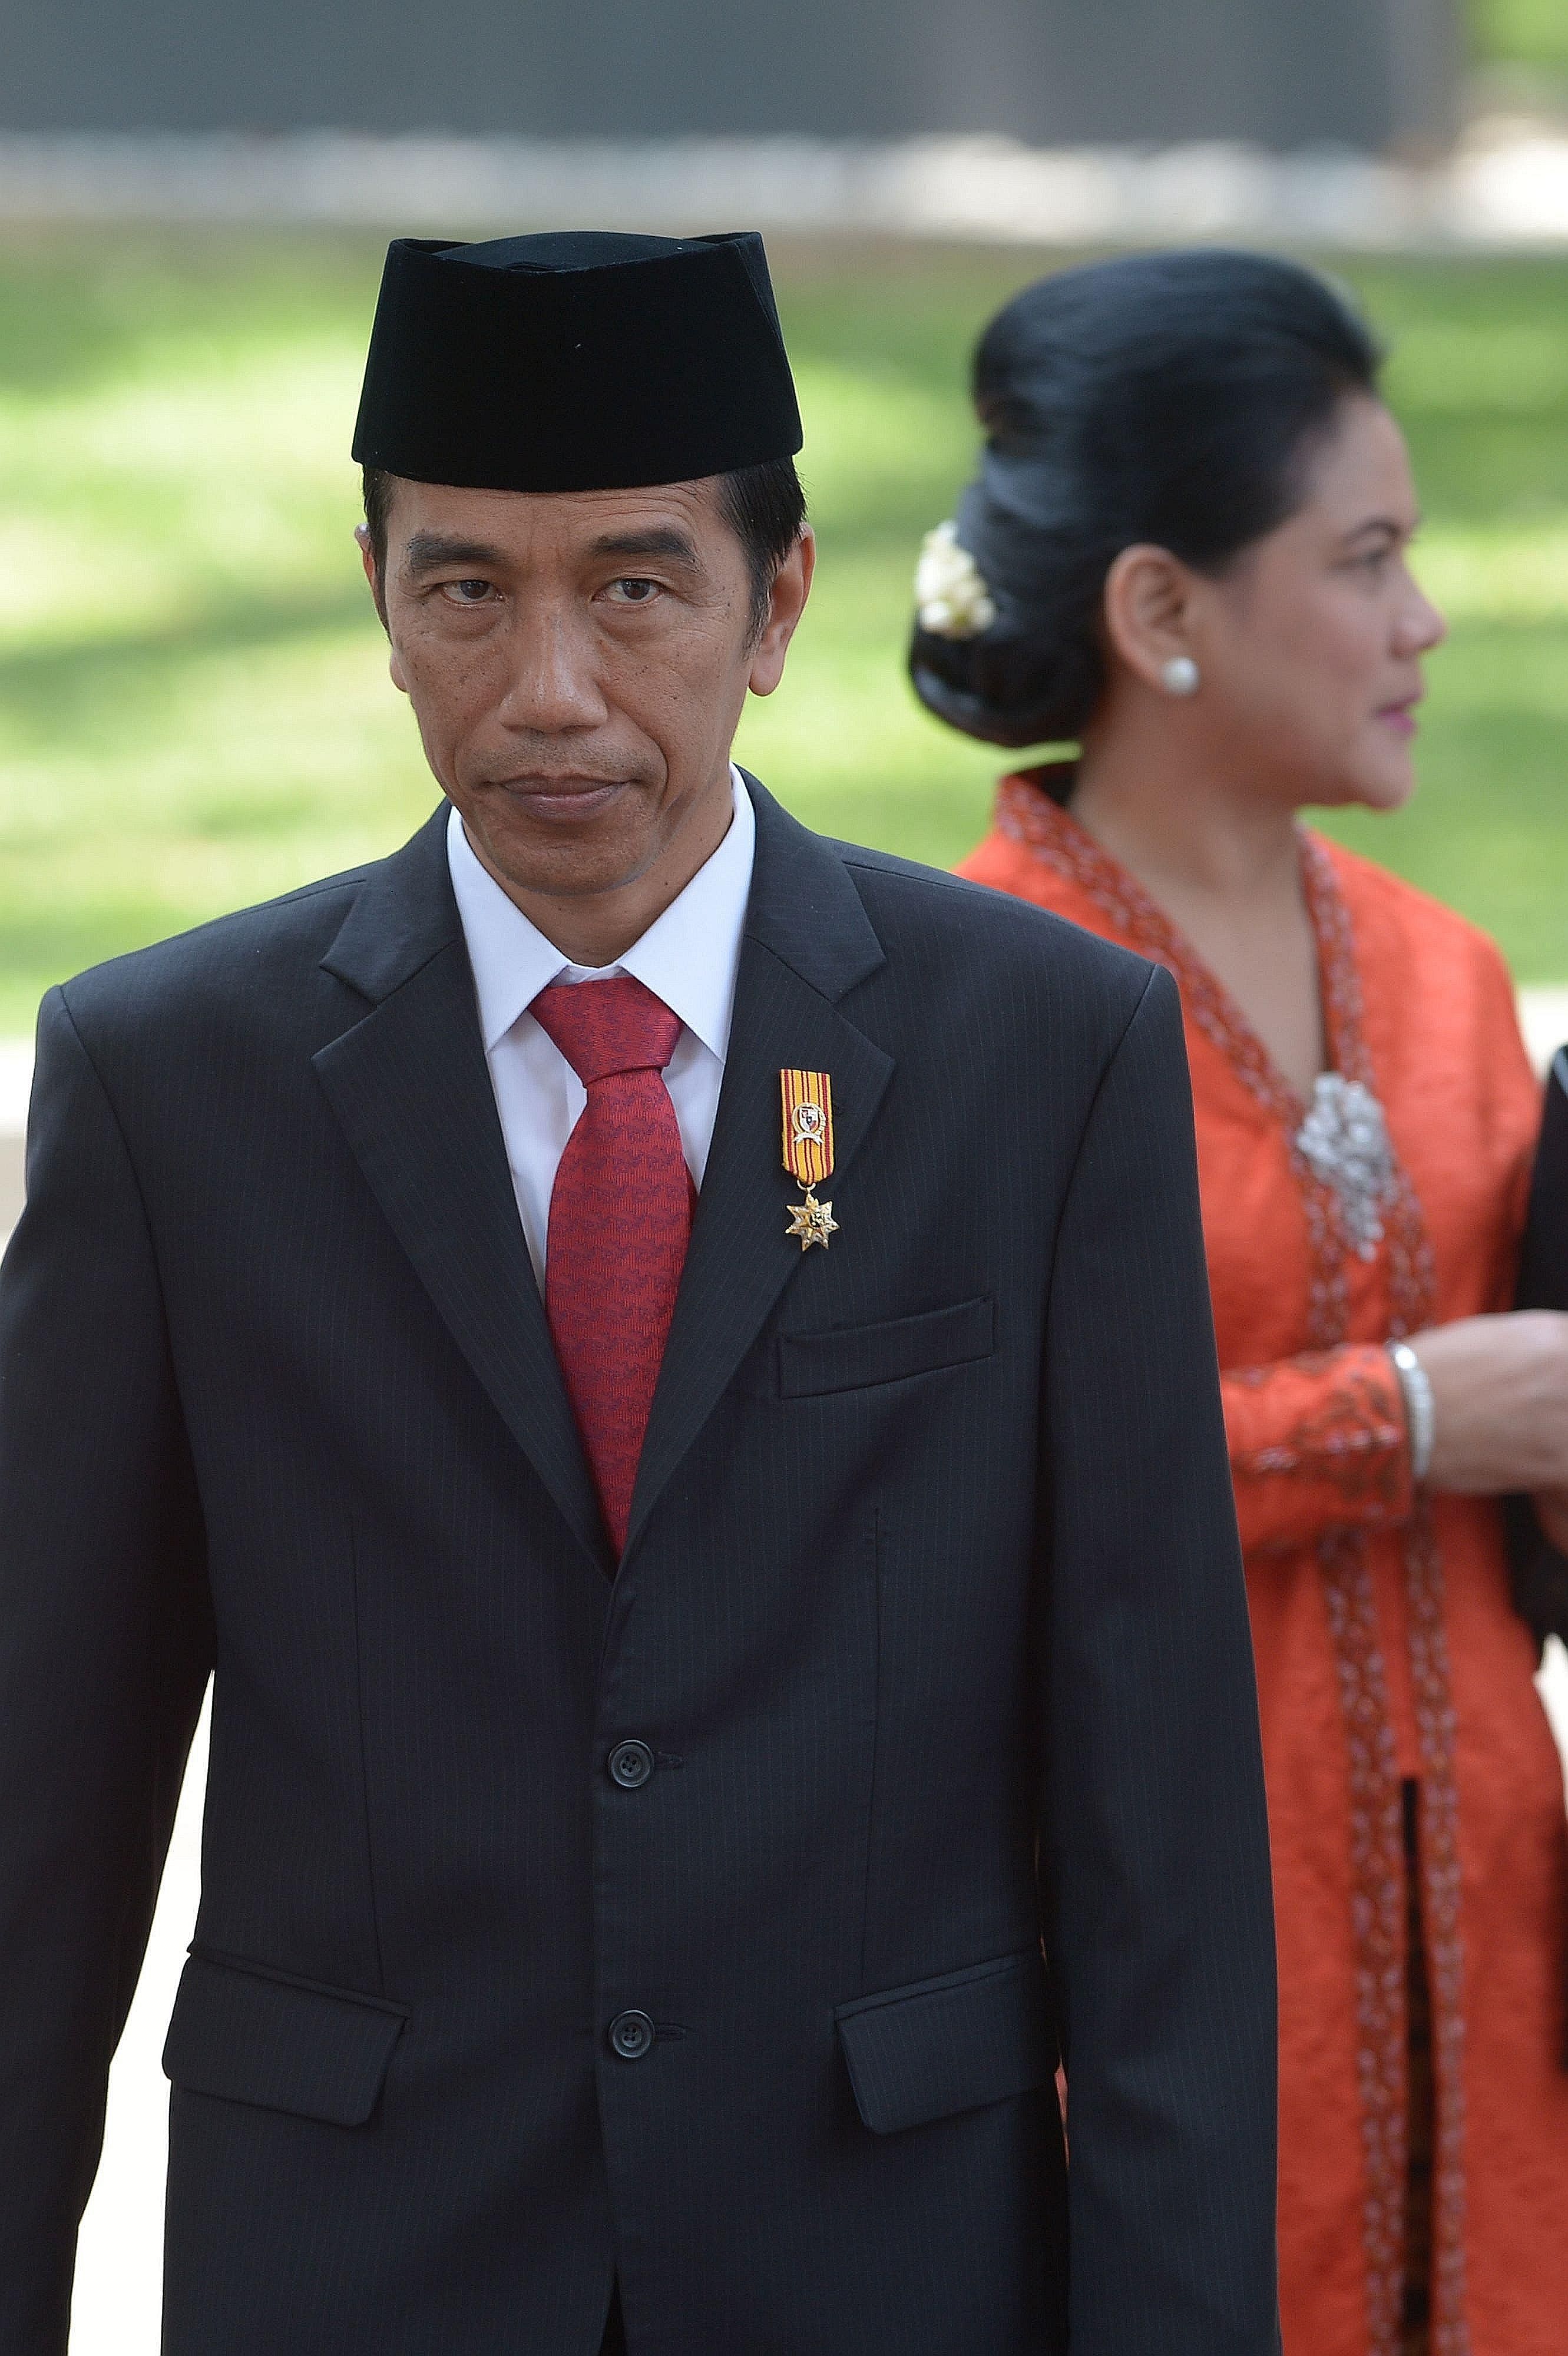 Indonesian President Joko Widodo with his wife Iriana Widodo at the presidential palace in Jakarta. President Joko's humility and approachability have endeared him to Indonesians. He embodies the way in which a people's democracy can unite to fight t